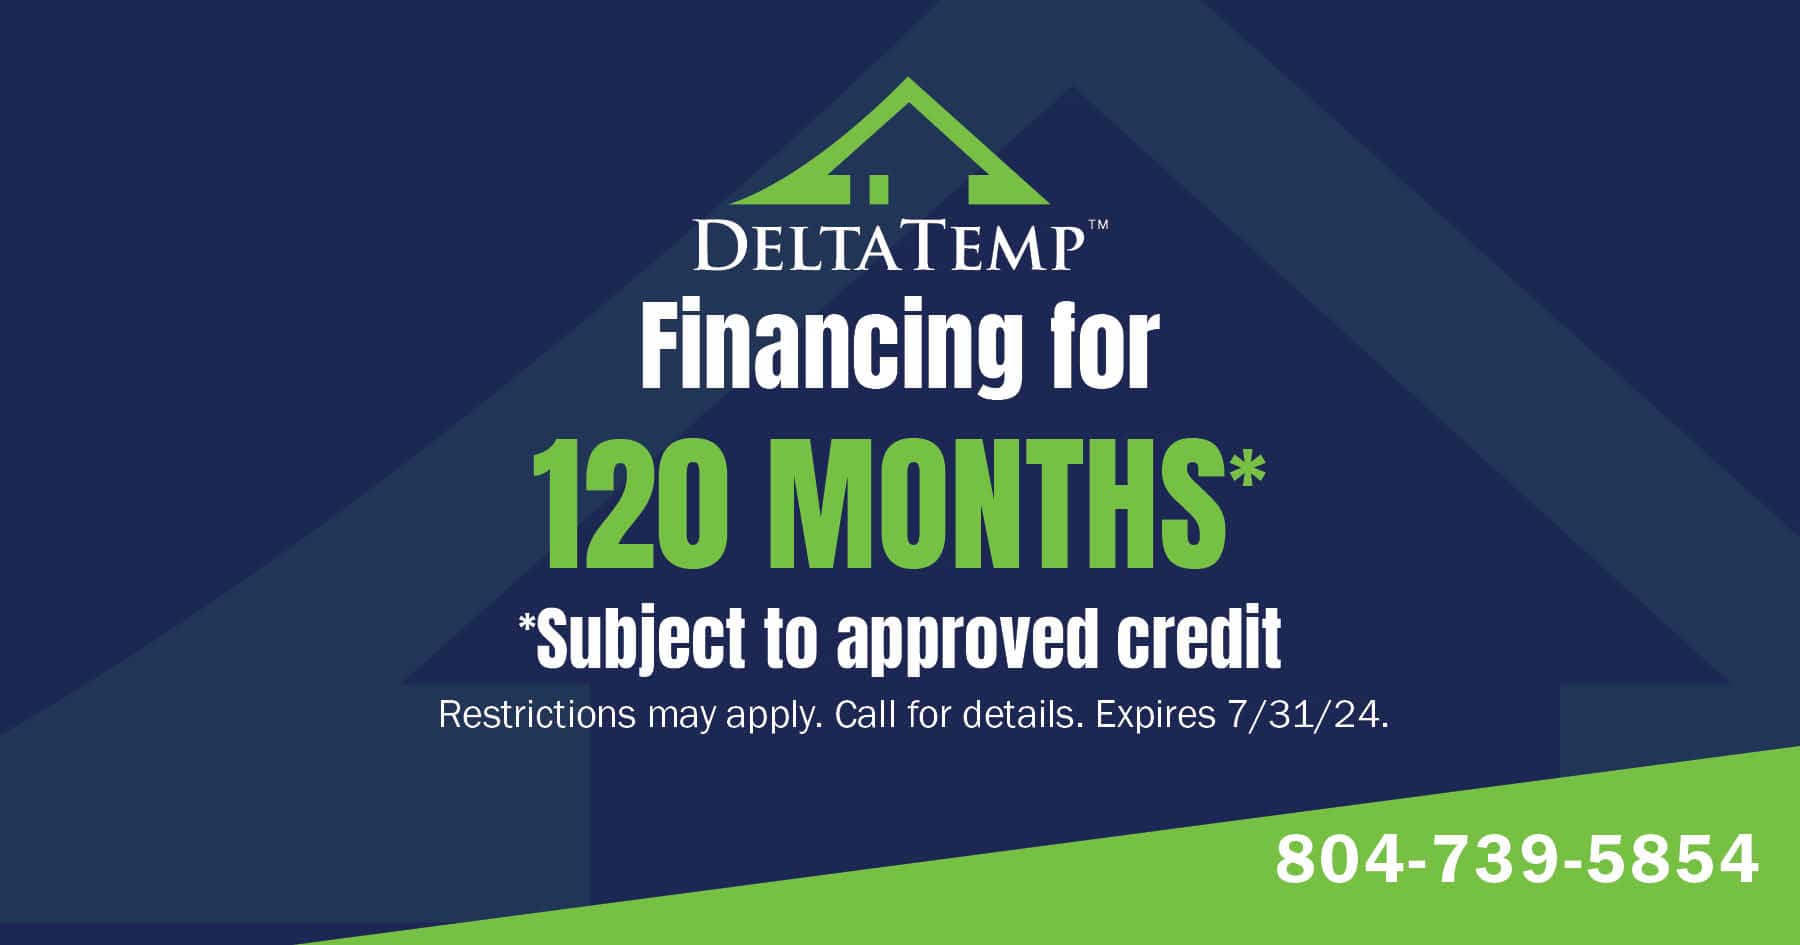 Financing for 120 months. Subject to approved credit. Restrictions may apply. Call for details. Expires 7/31/2024.